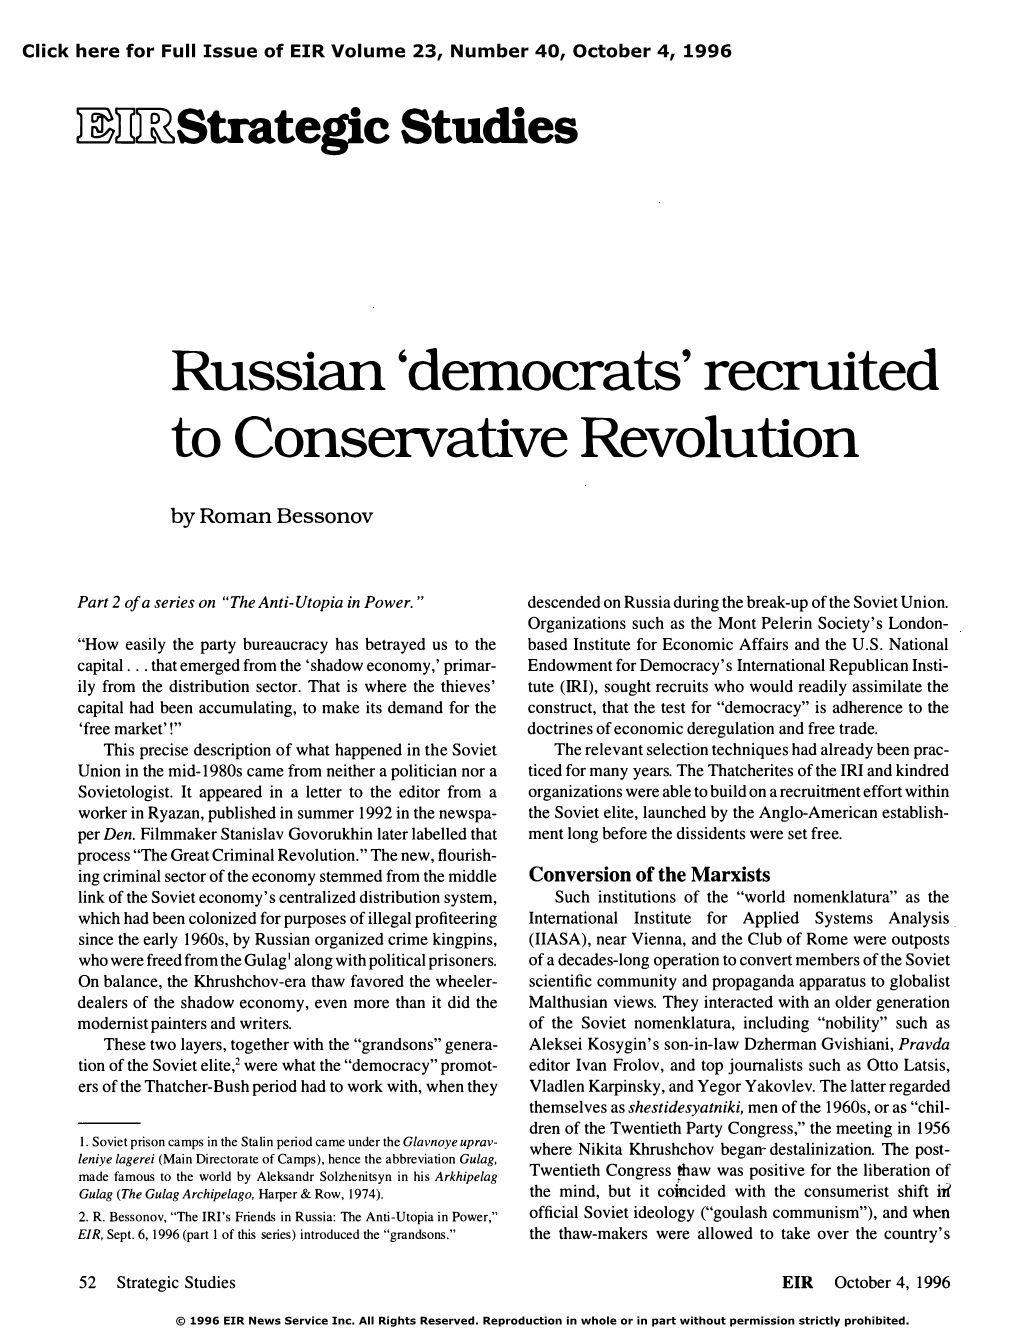 Russian 'Democrats' Recruited to Conservative Revolution